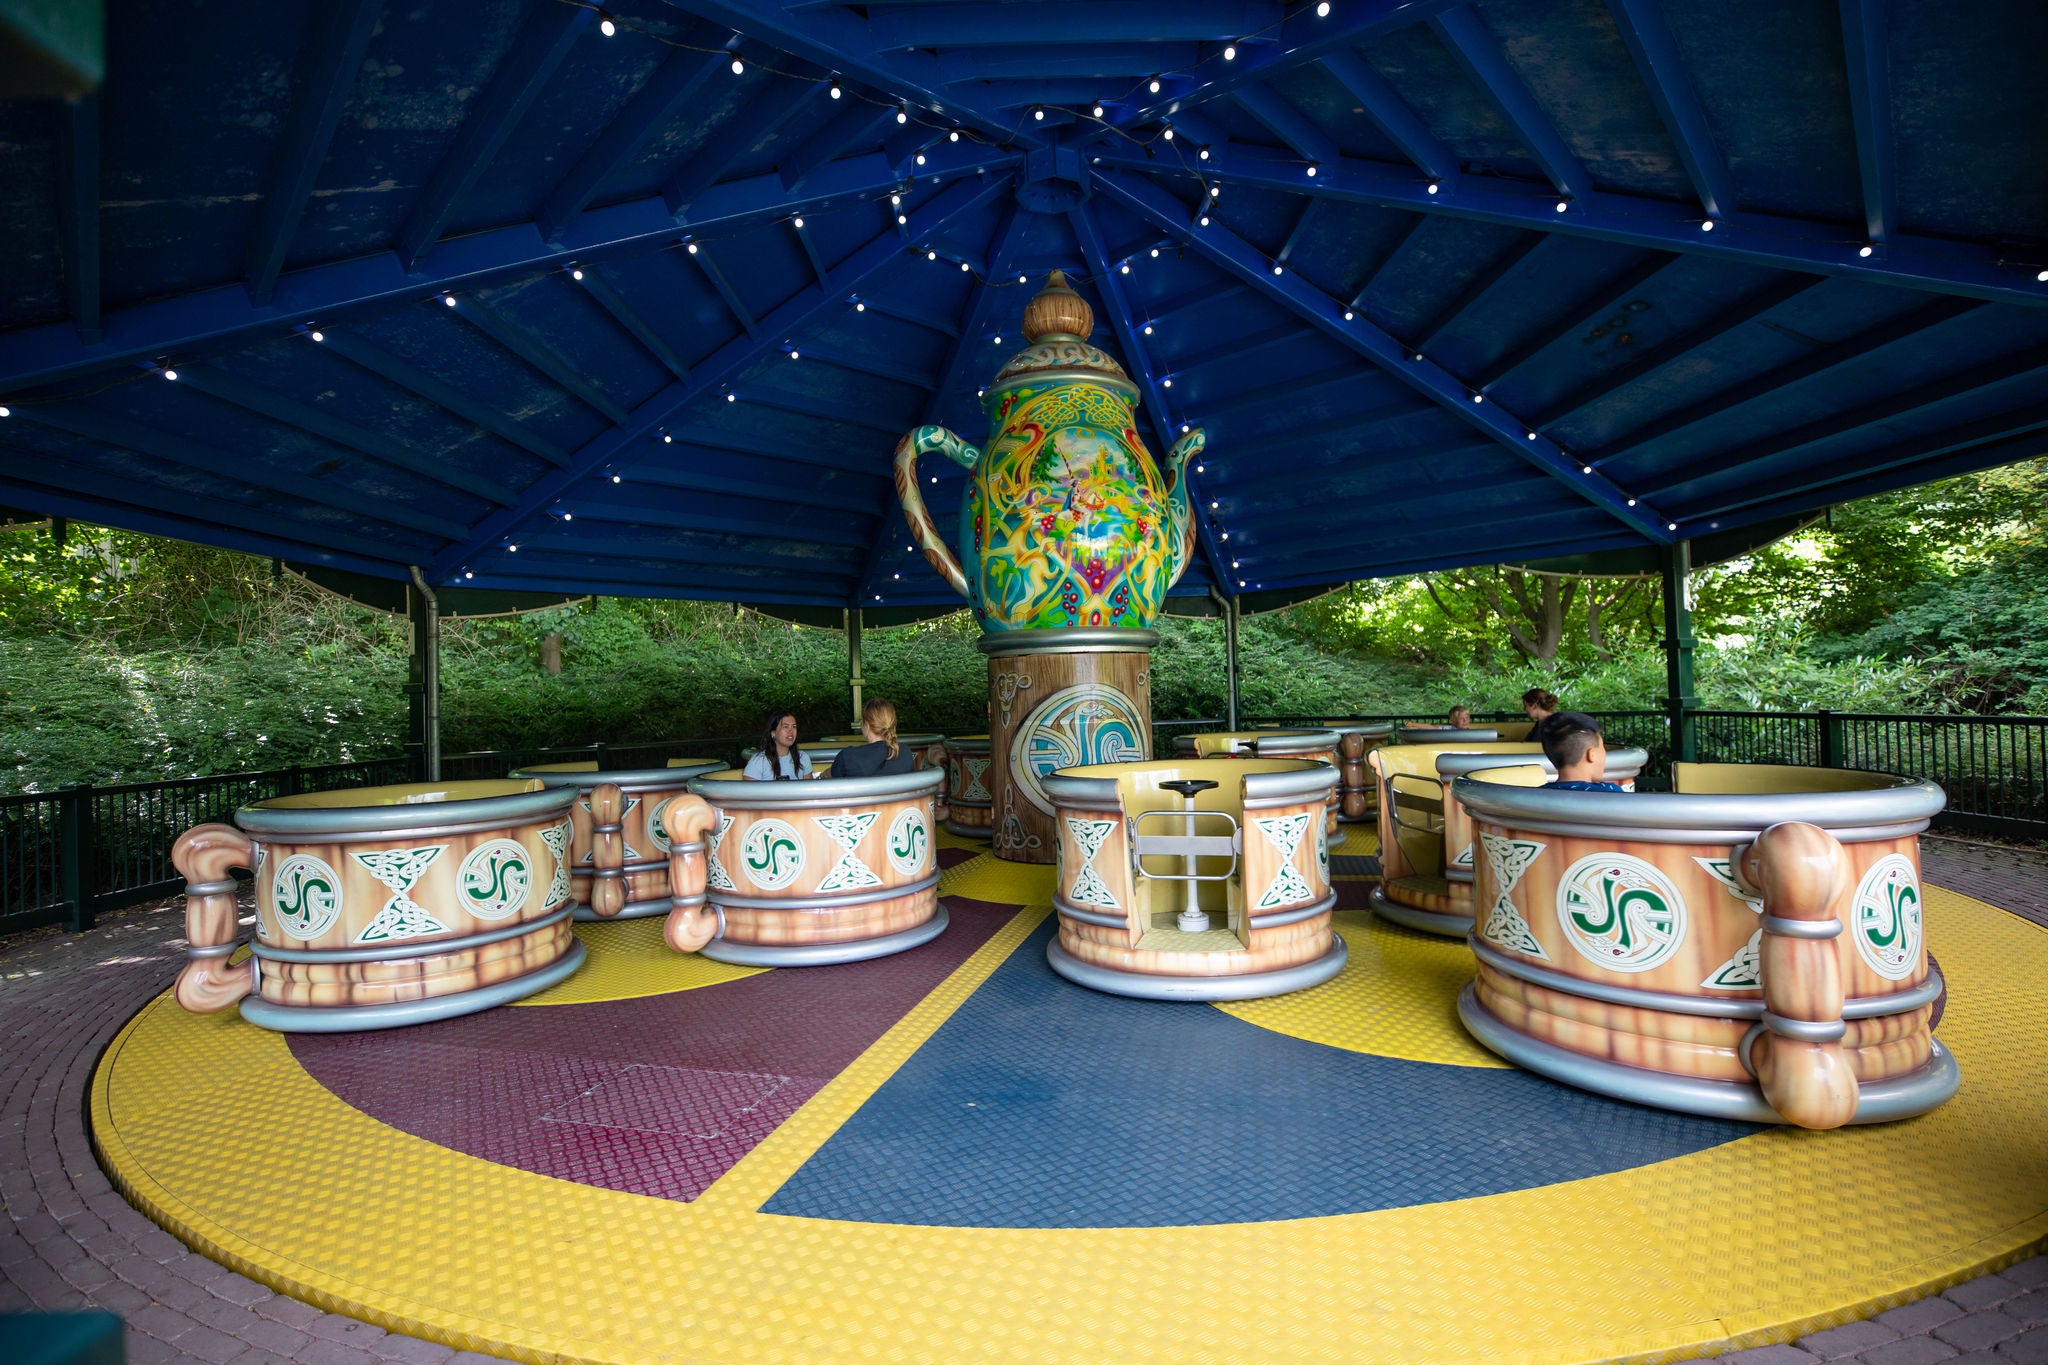 Get into the teacups together at Walibi Holland.